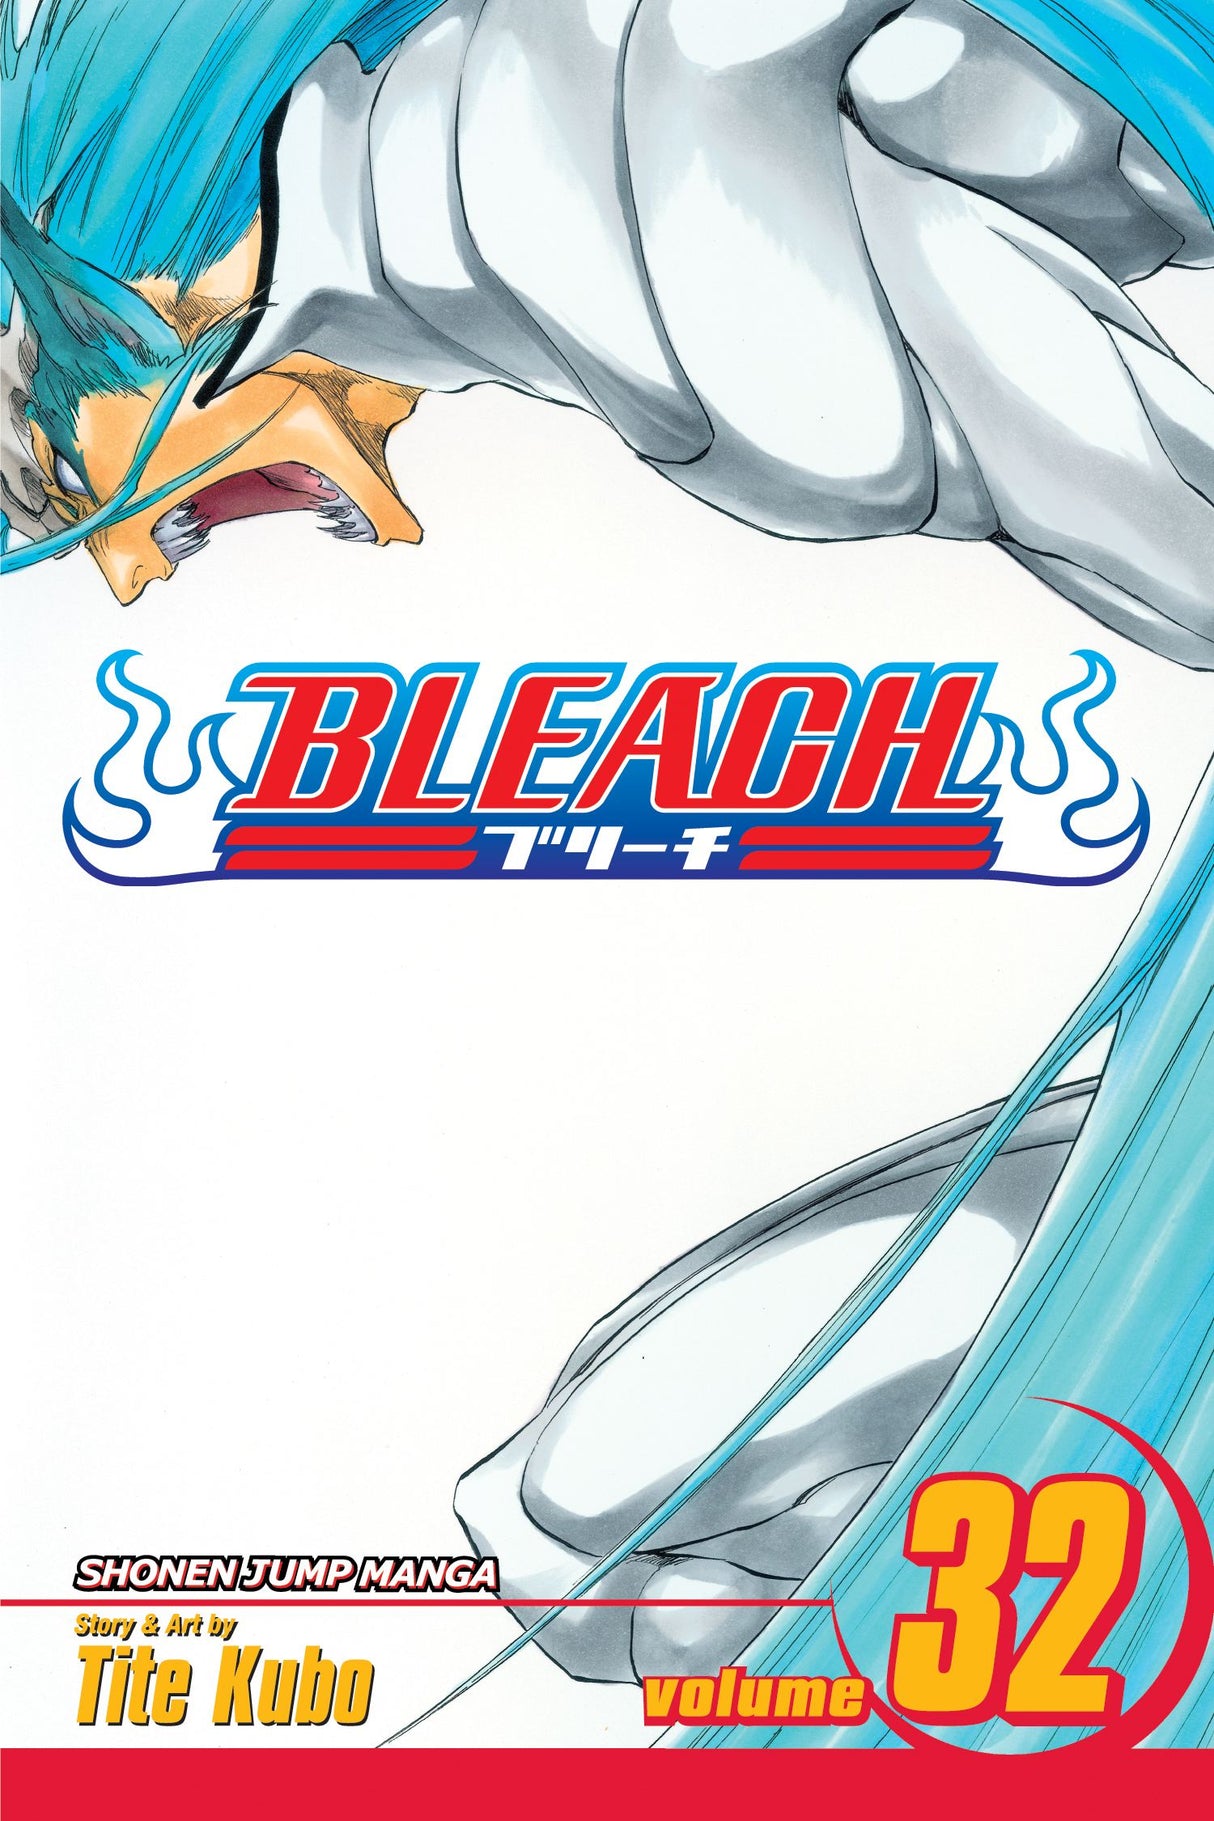 Cover image of the Manga Bleach, Vol. 32: Howling